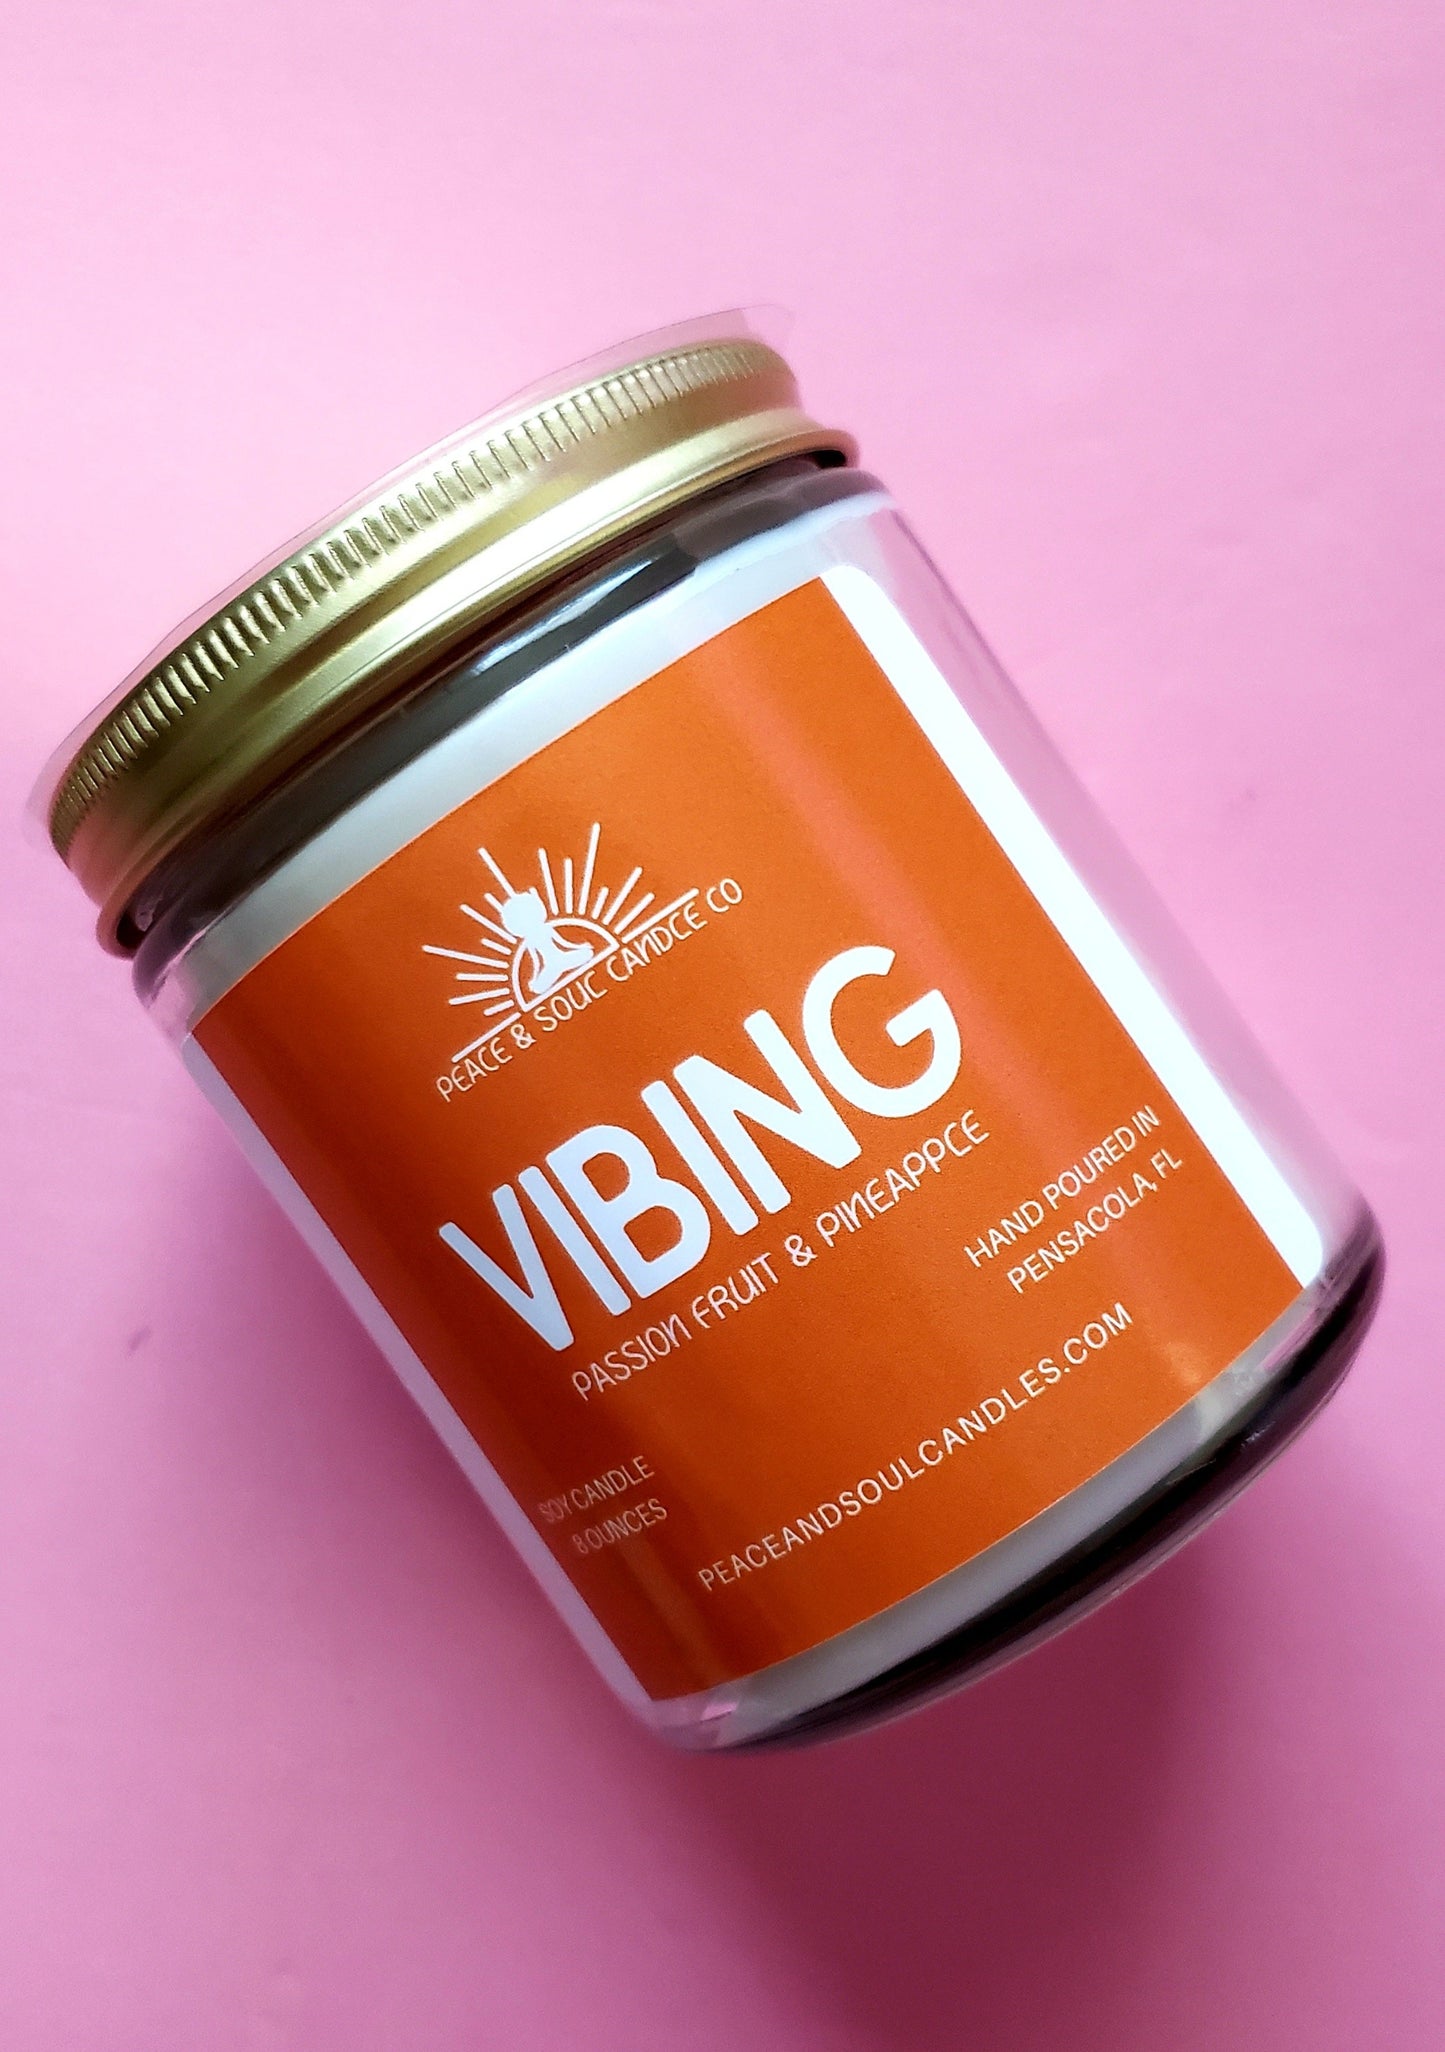 The Vibing Candle